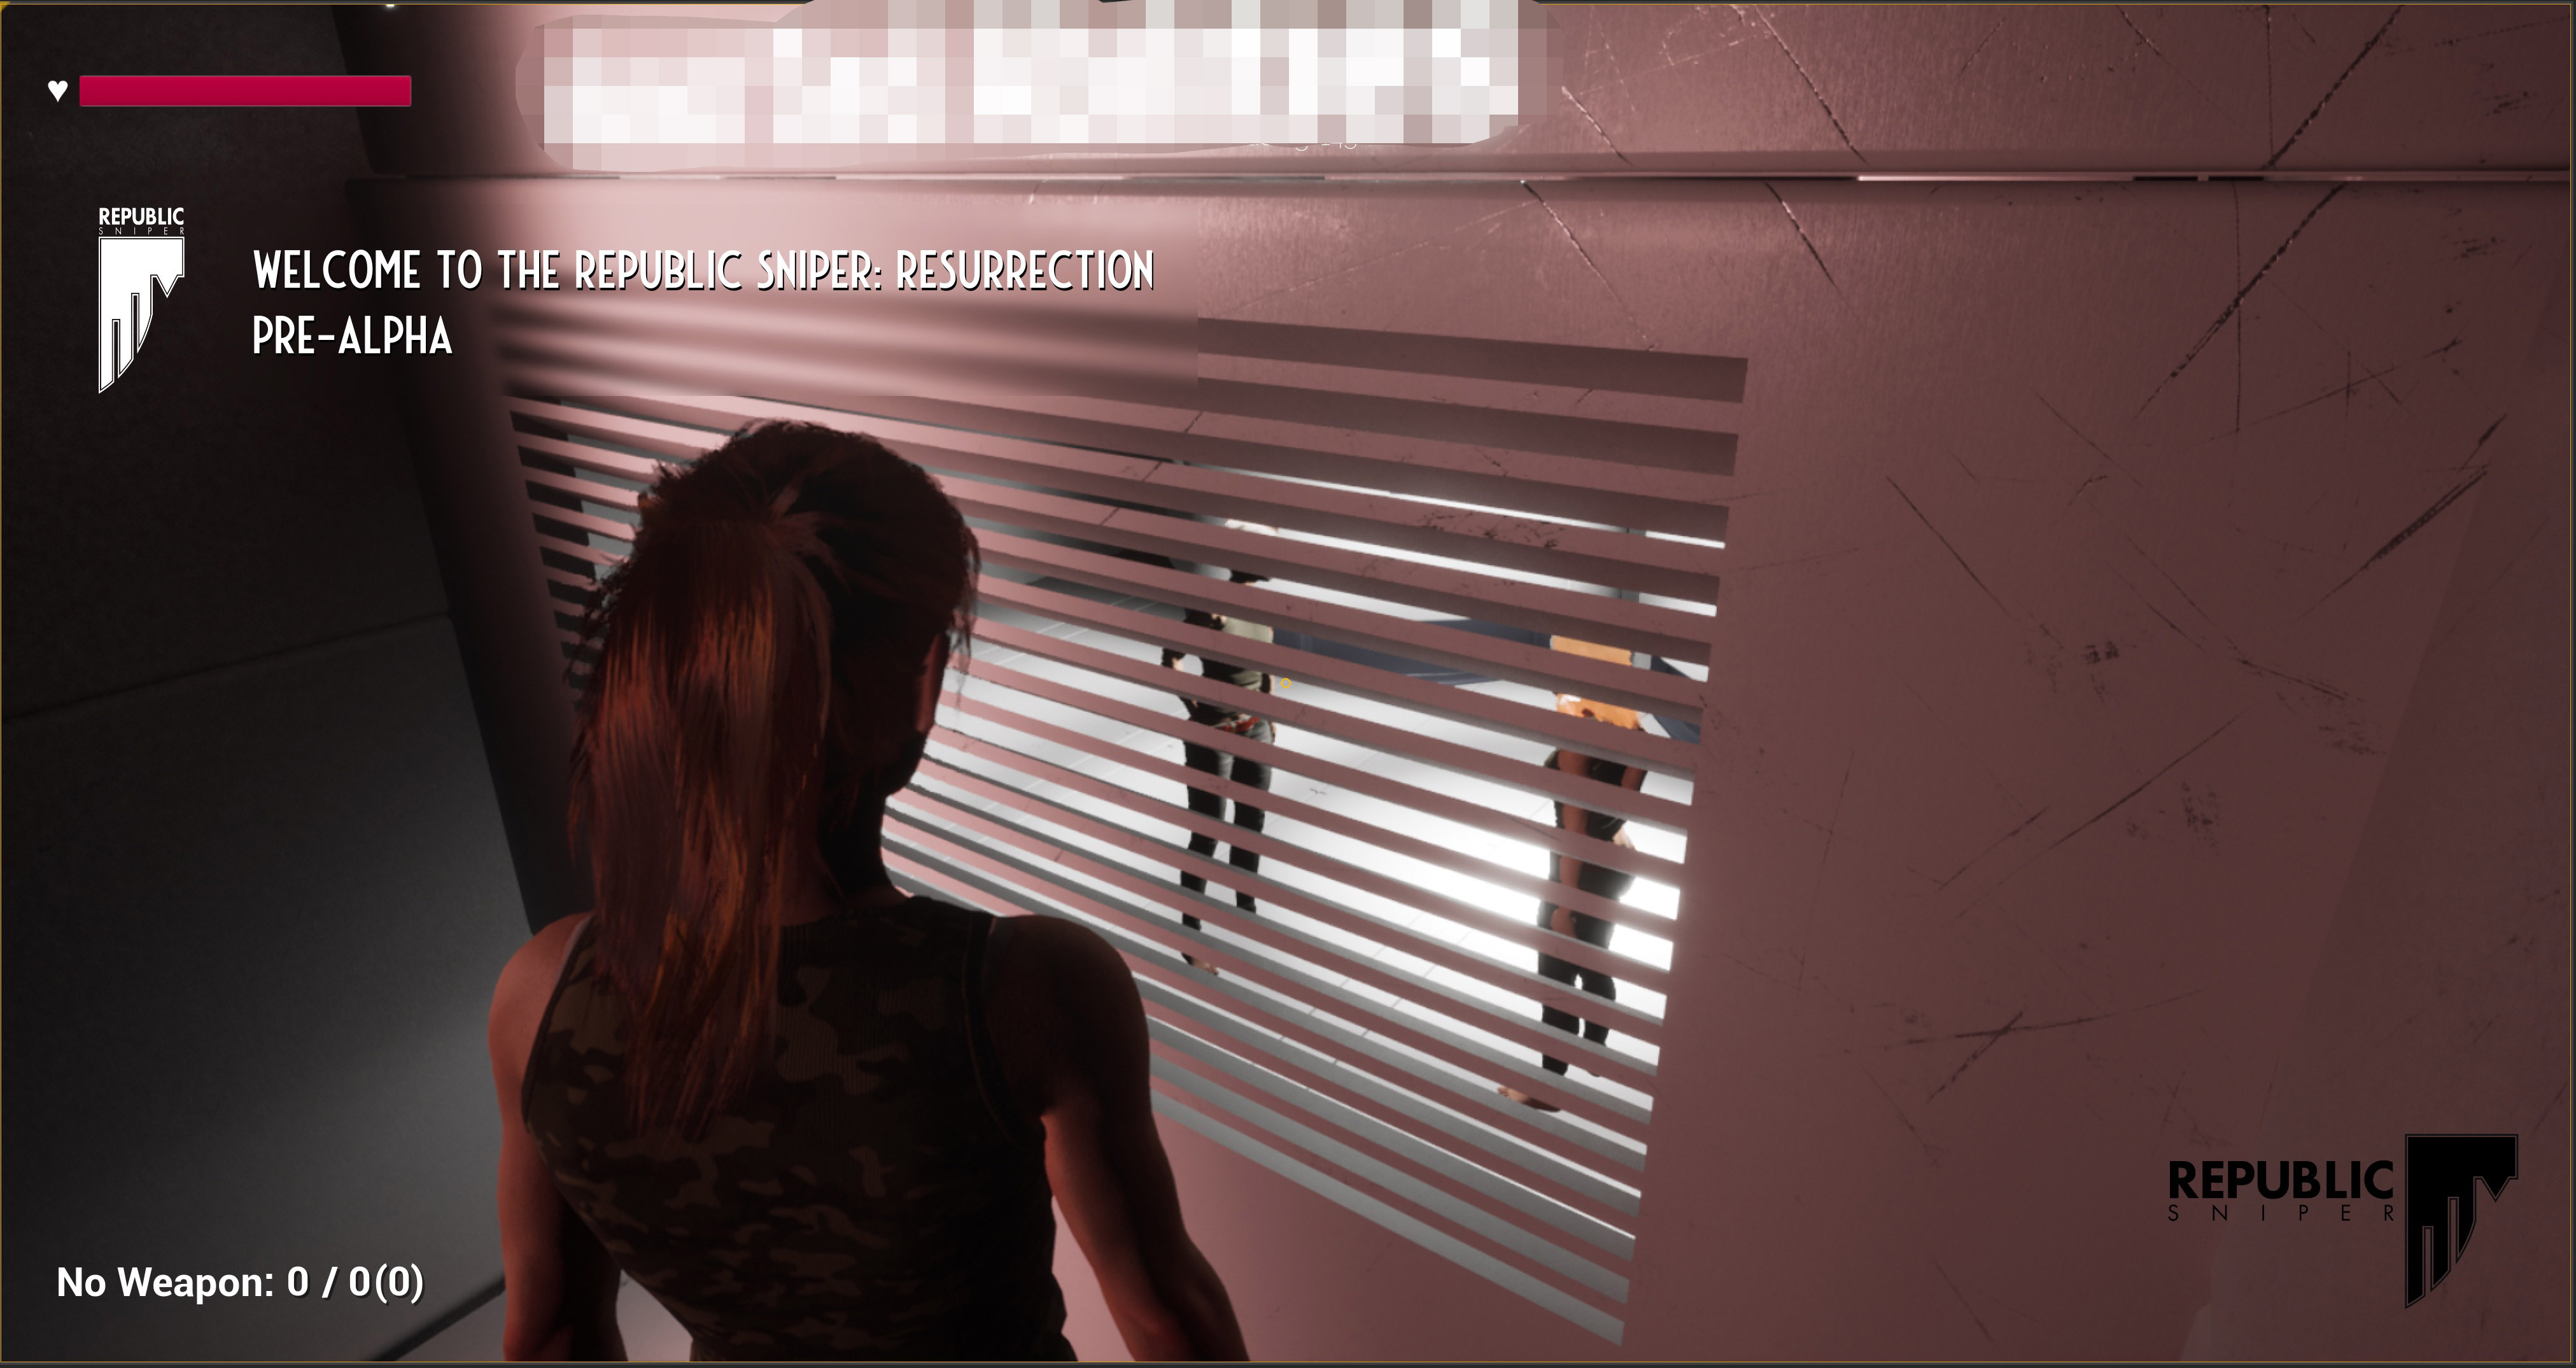 A screenshot showing the player looking through a ventilation vent at people having a conversation